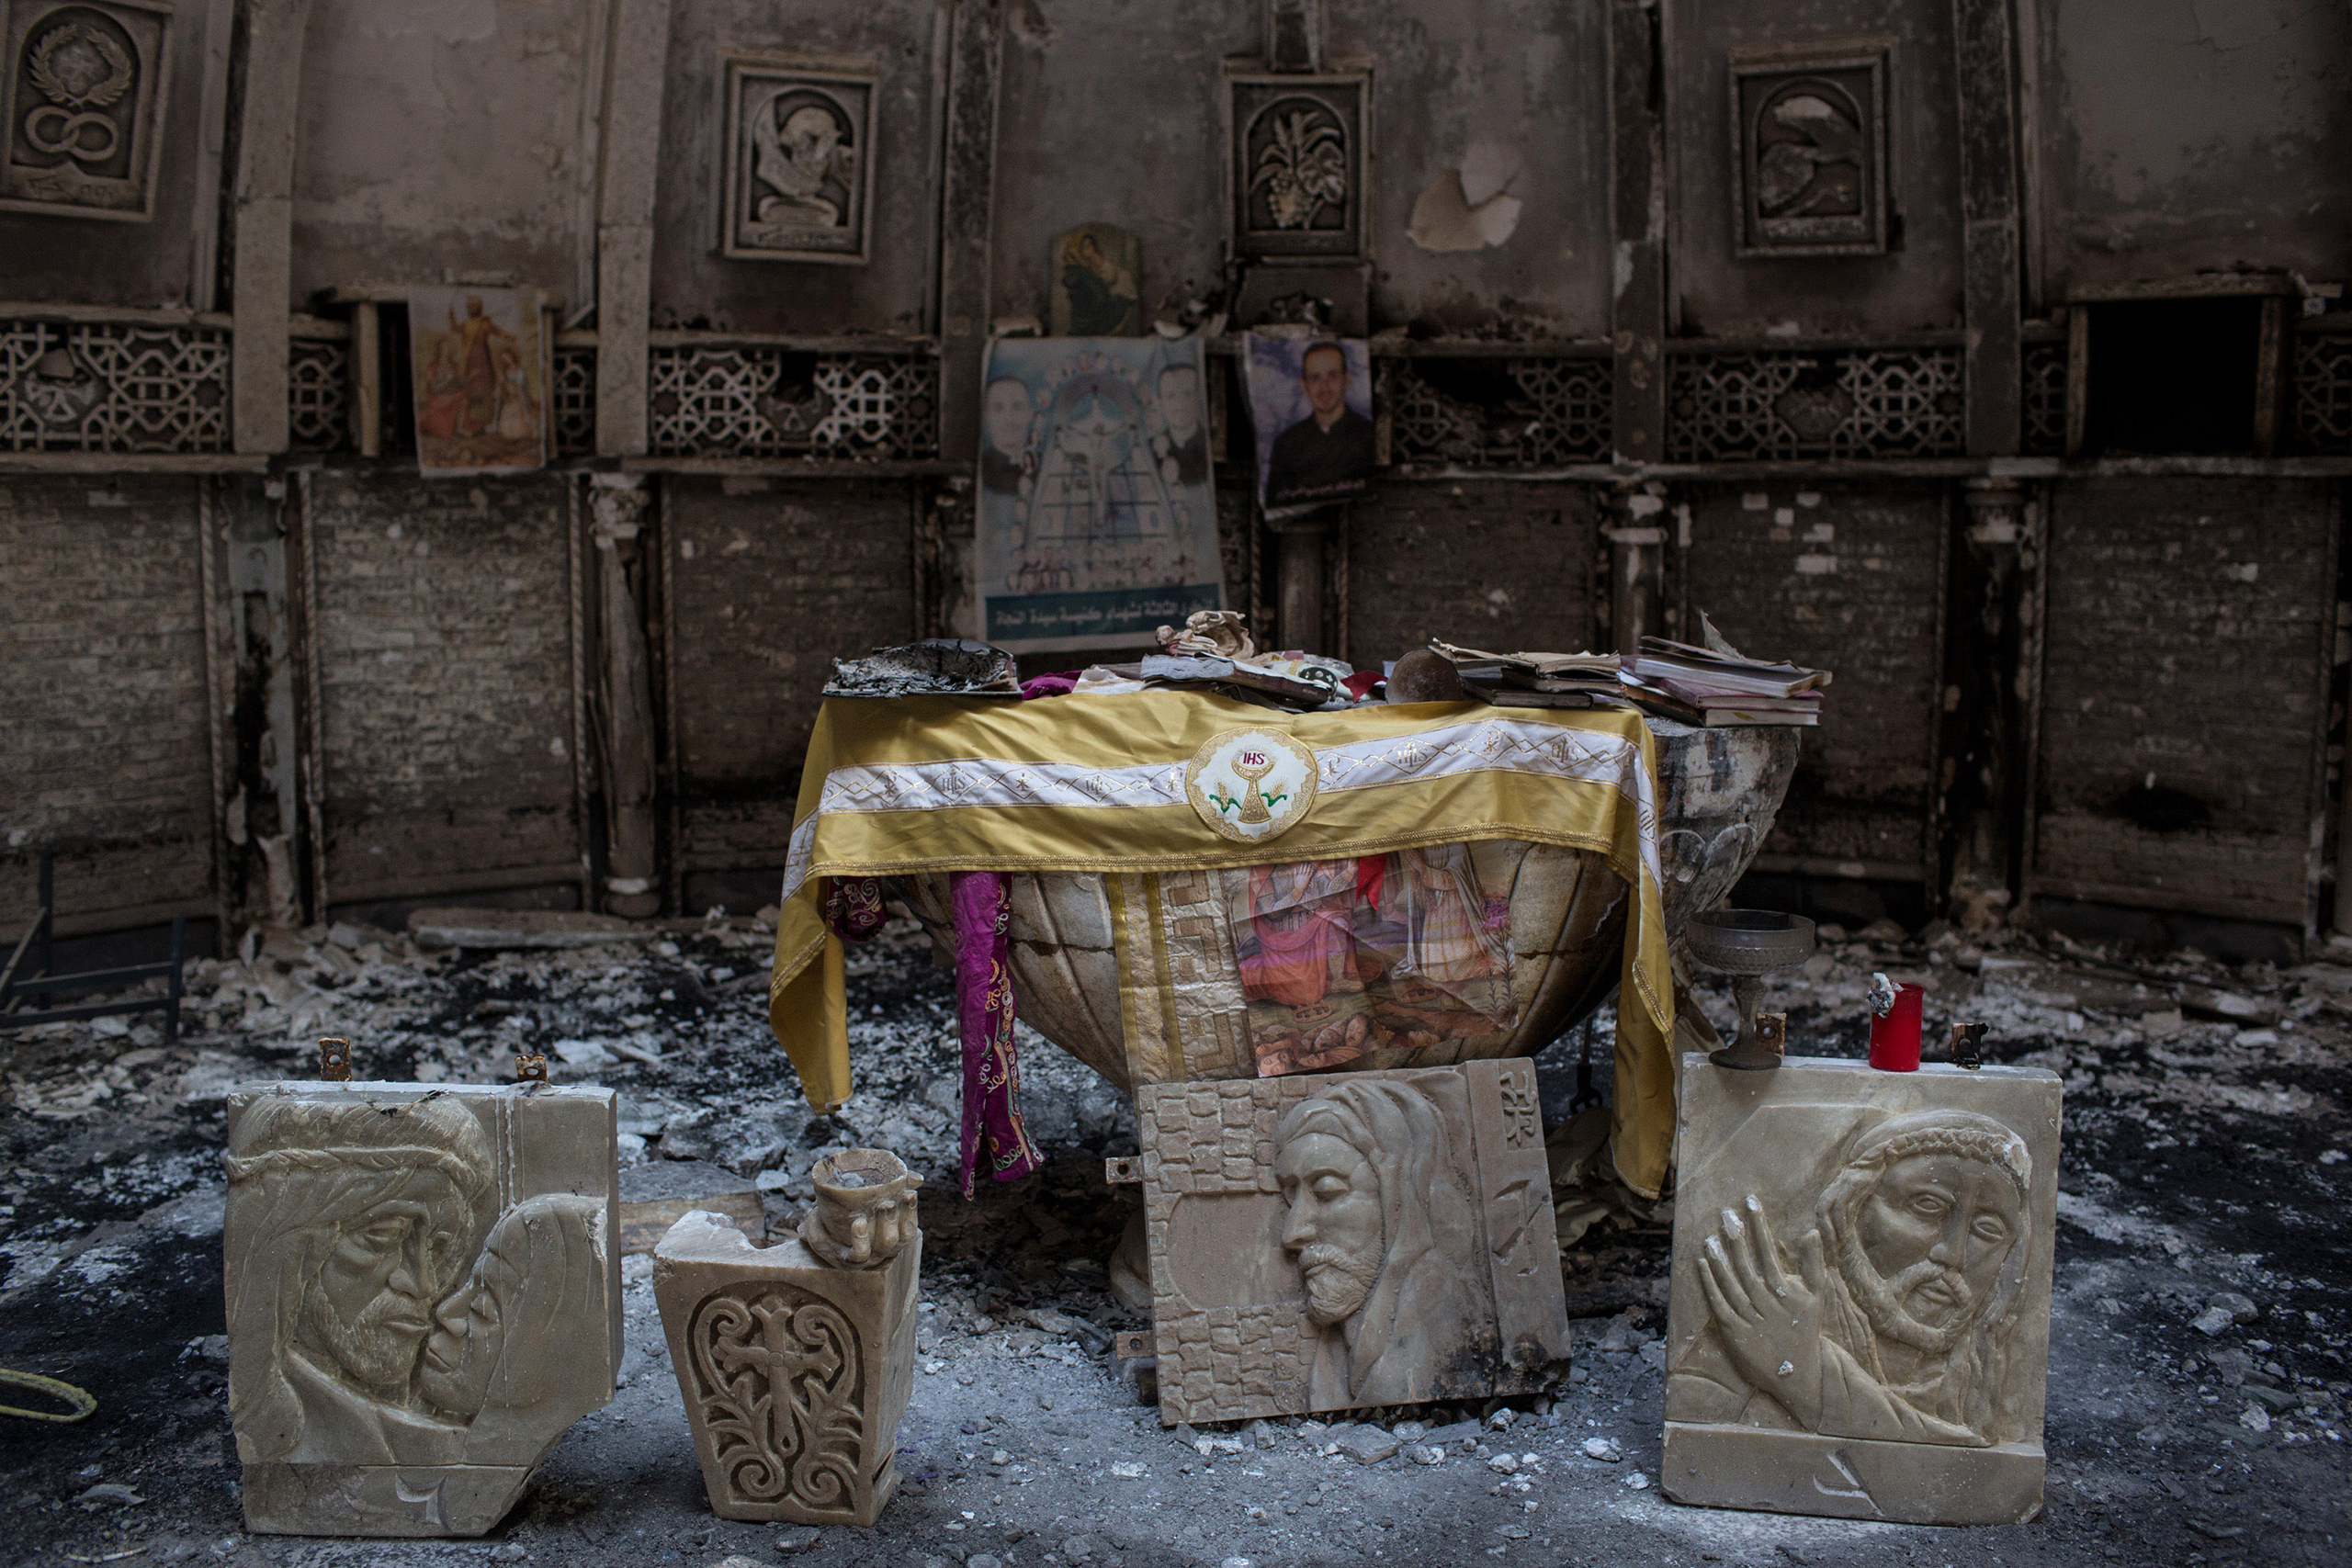 Salvaged books and other items are placed around the altar of a church, burned and destroyed by ISIS during the group's occupation of the predominantly Christian town of Qaraqosh, Iraq, on Dec. 27, 2016. (Chris McGrath—Getty Images)